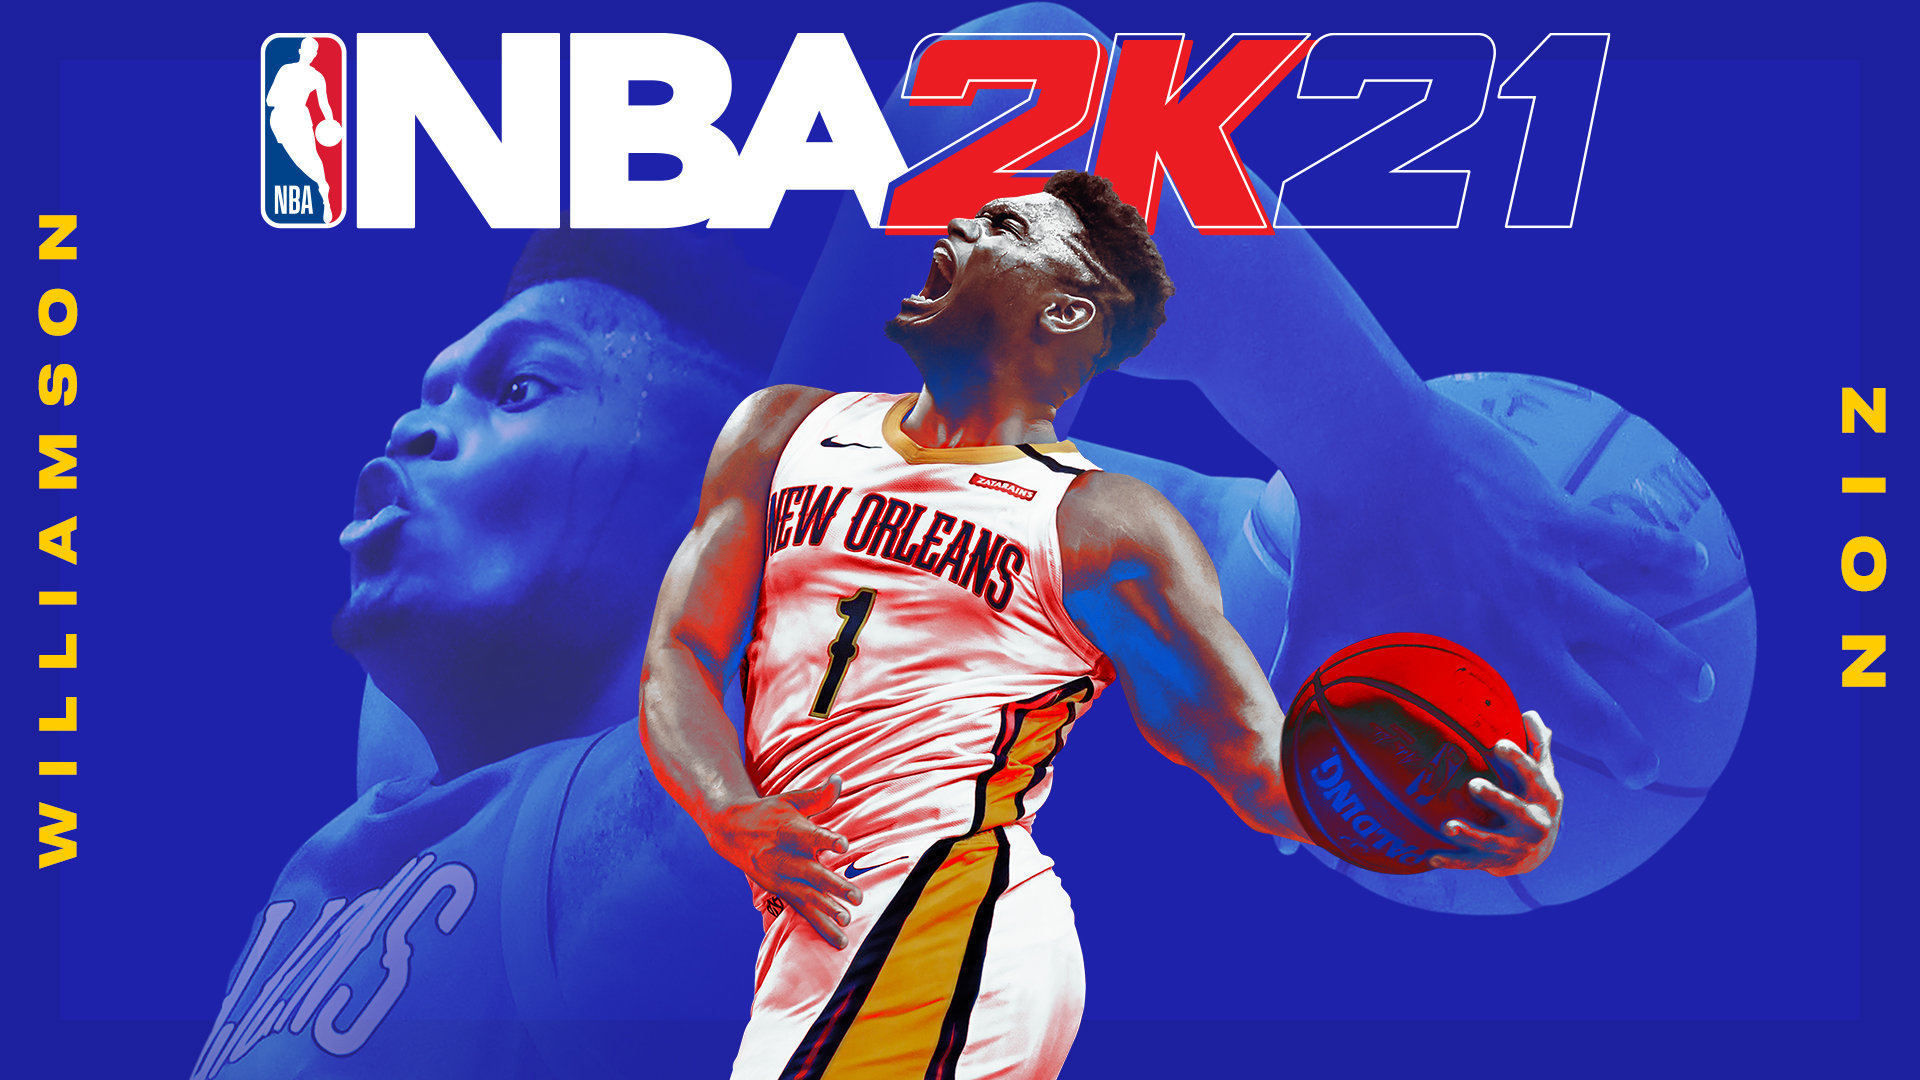 Nba k on the future is here ðª zionwilliamson is our cover athlete for next gen nbak pre